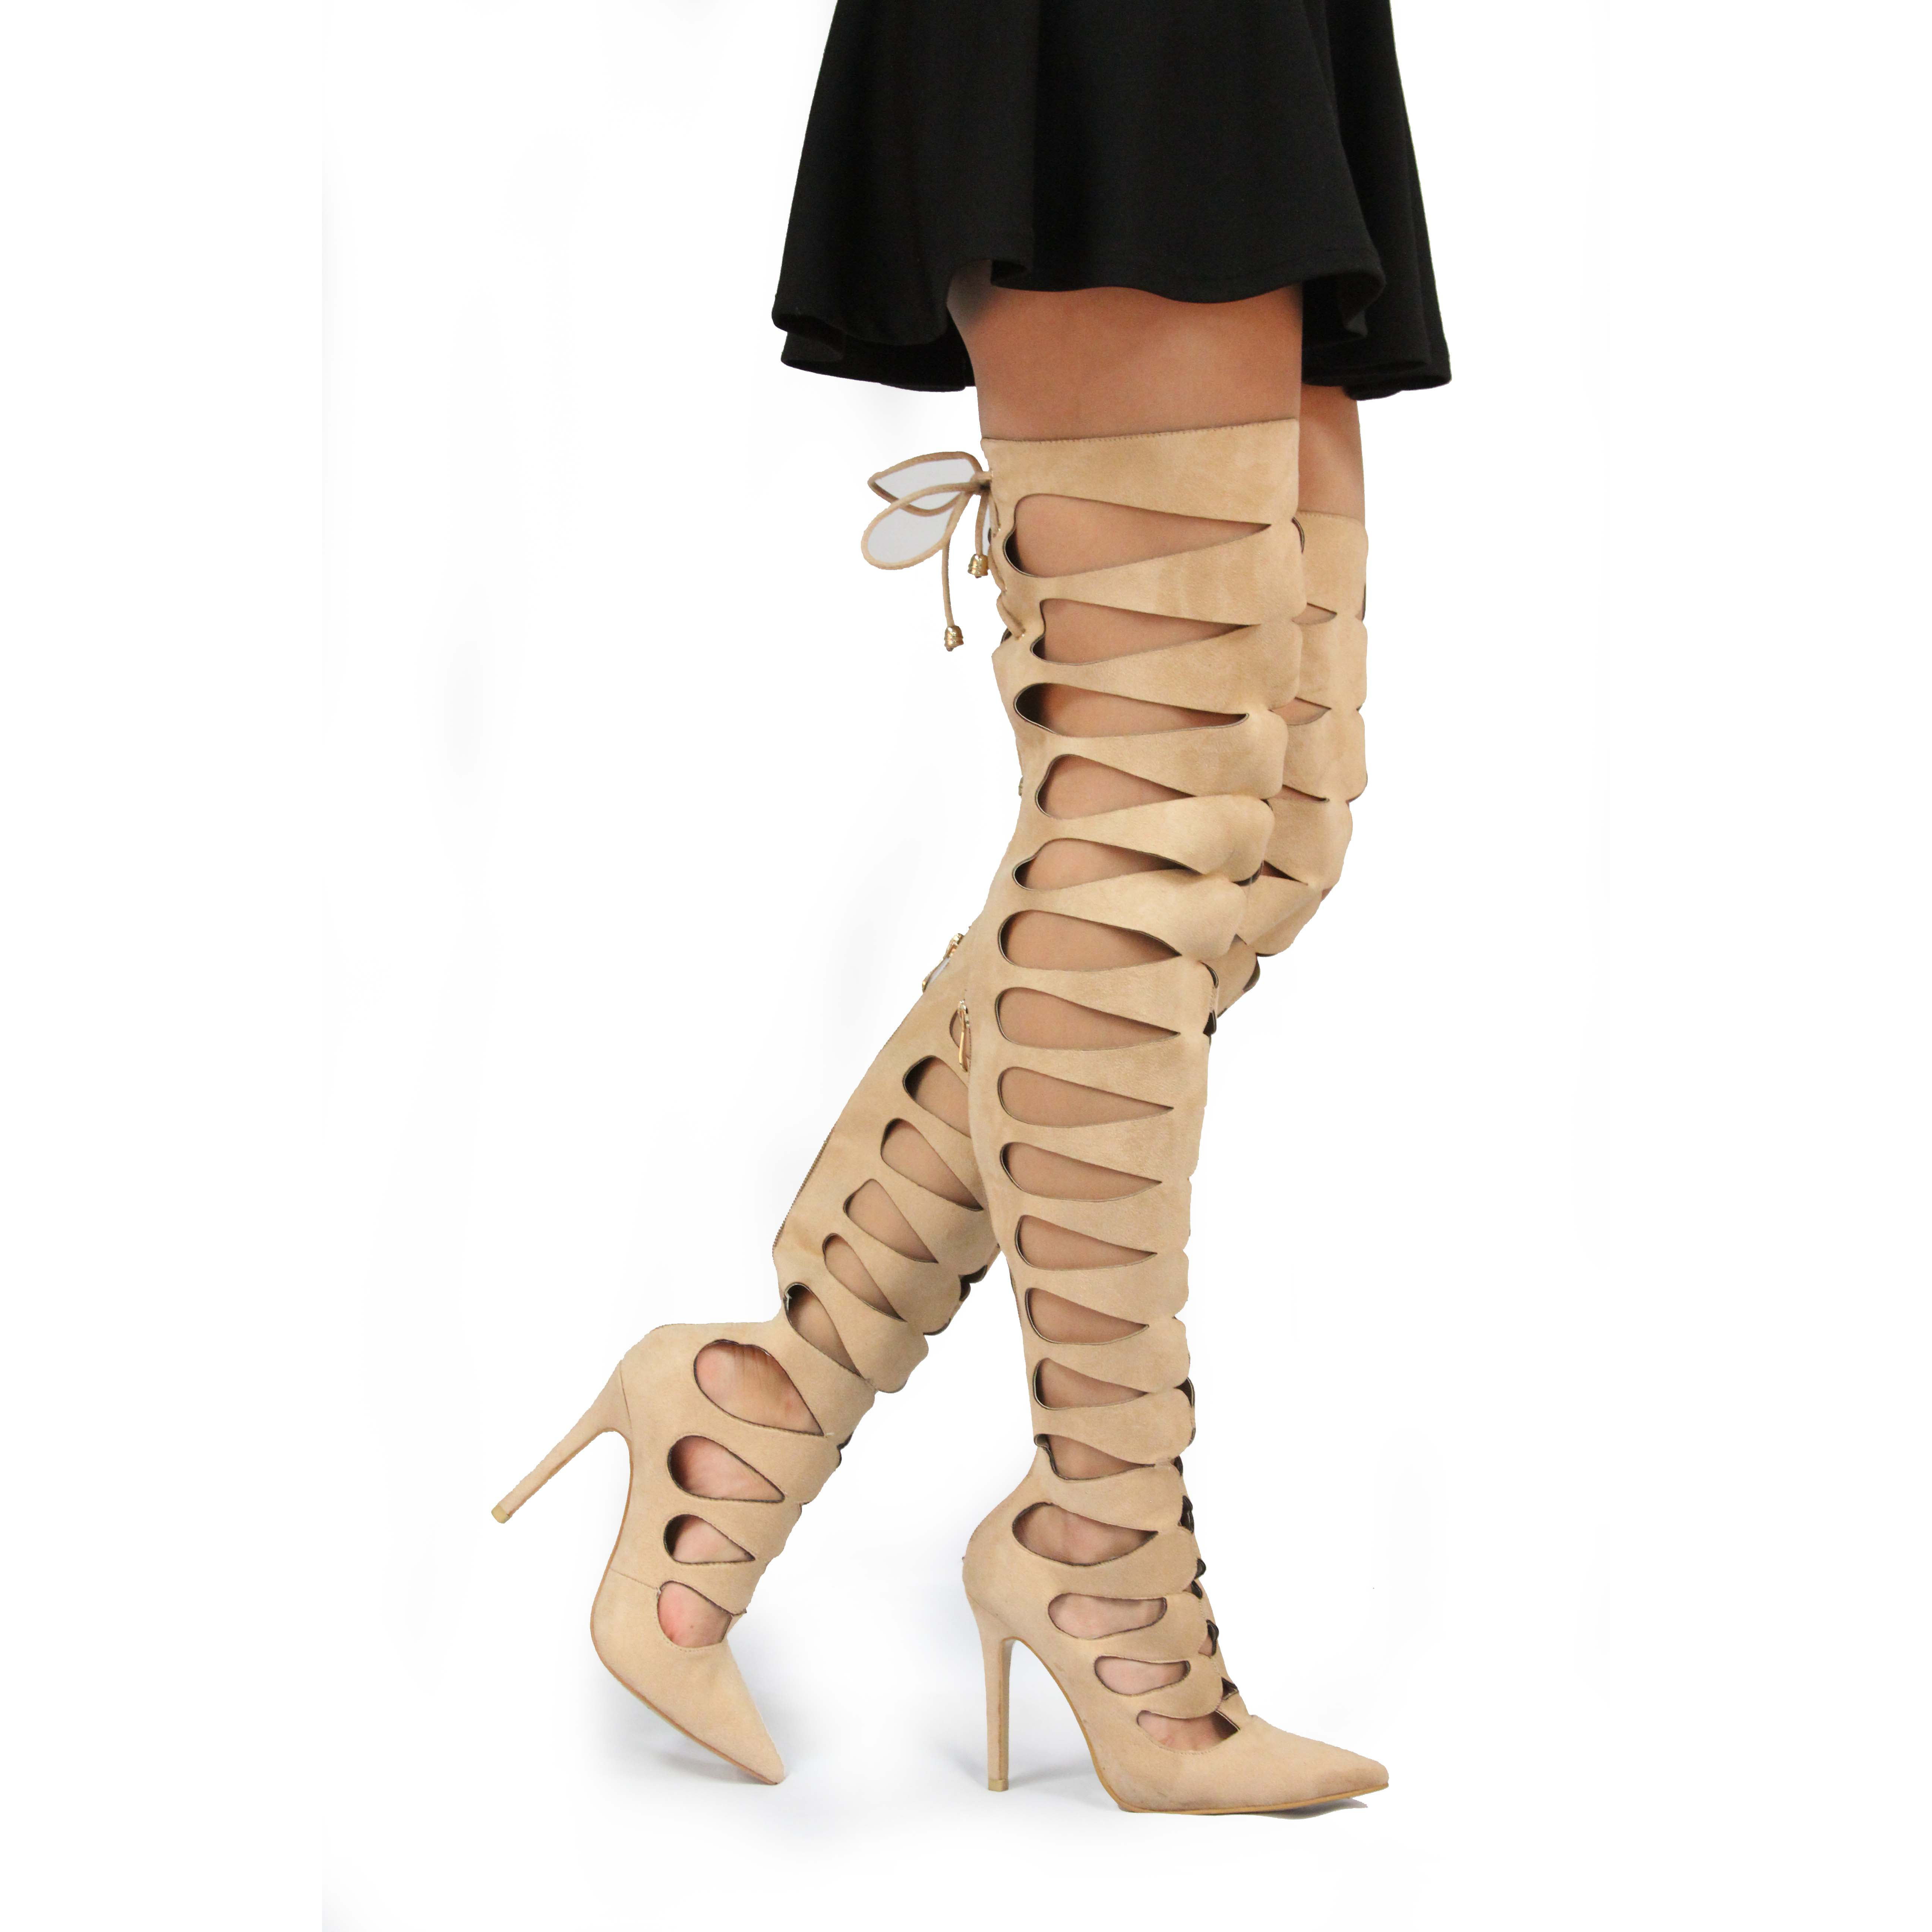 Static Fashion Static Fashion Womens Over The Knee Strappy Cut Out High Heel Gladiator Sandals